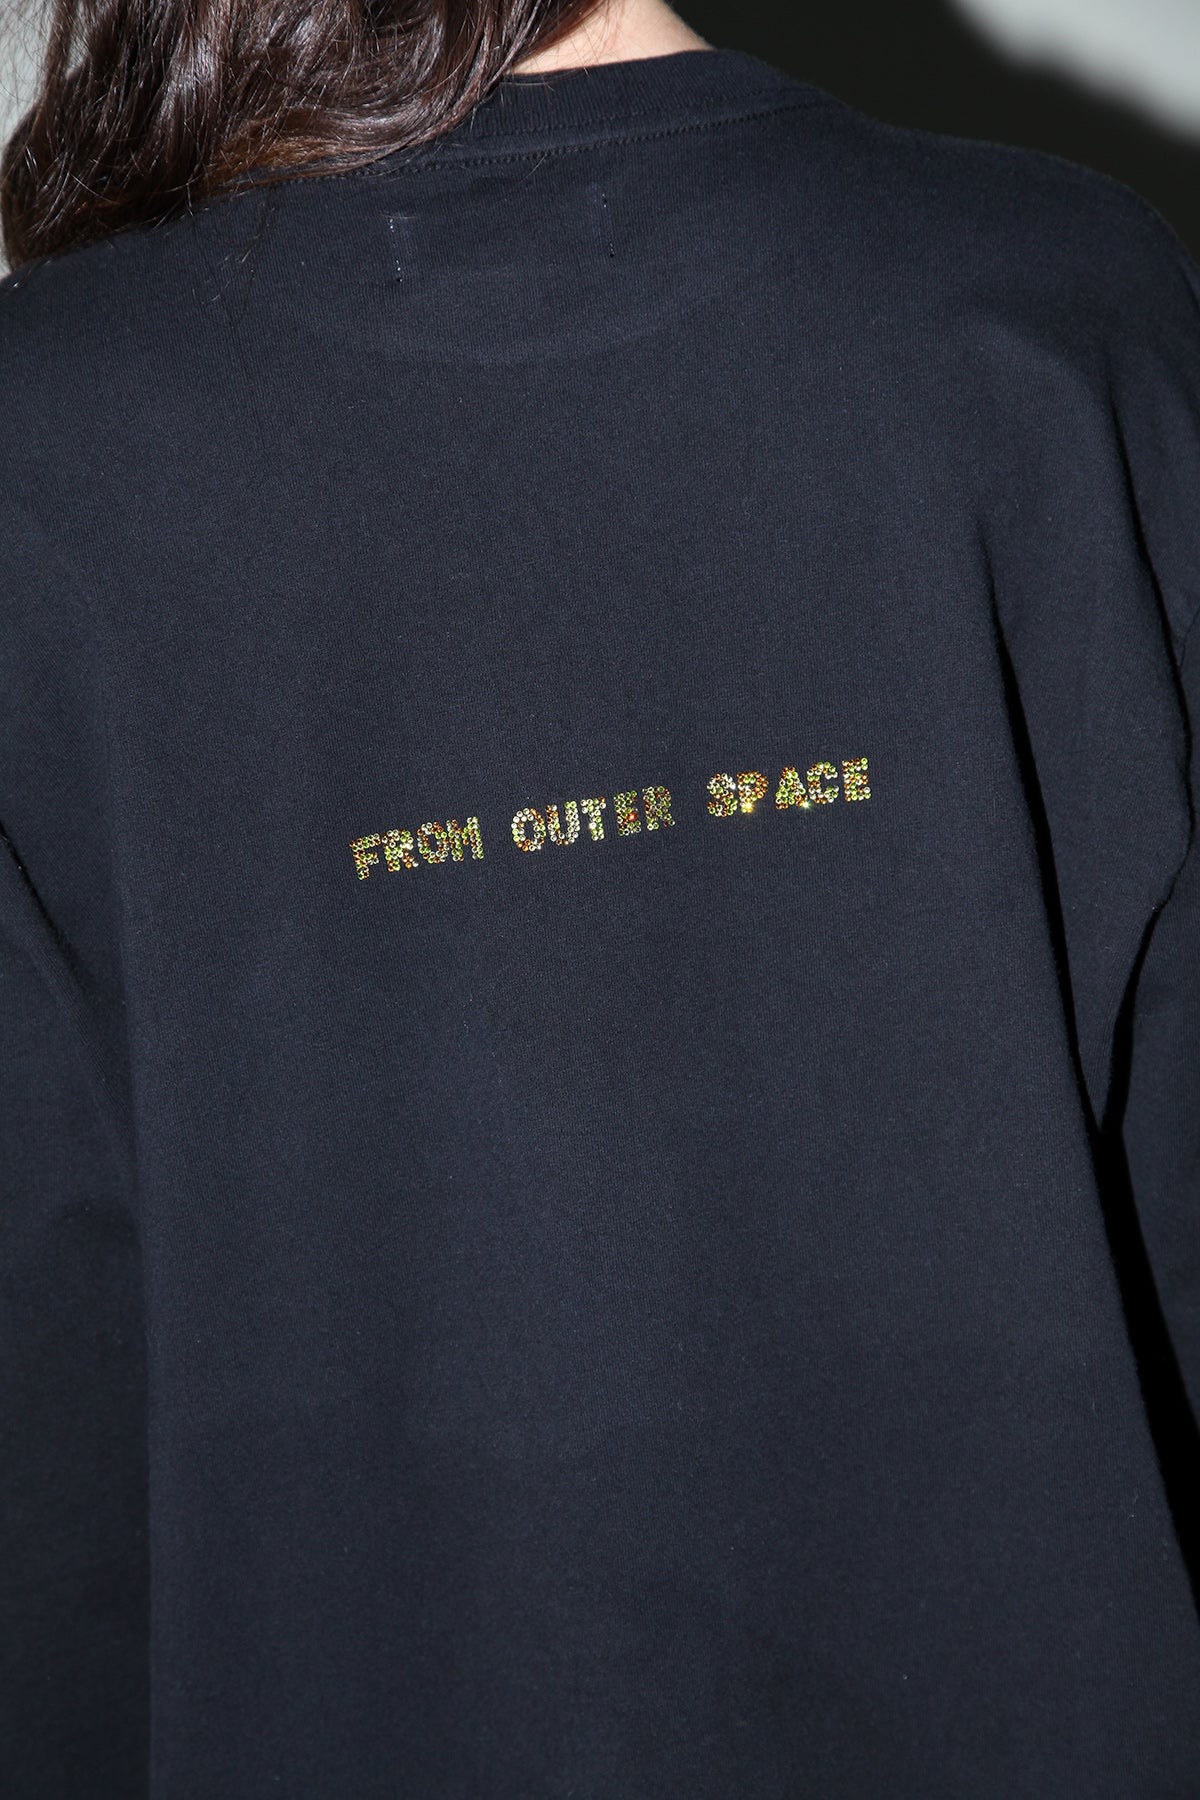 Rhinestone 'From Outer Space' Tee in Black